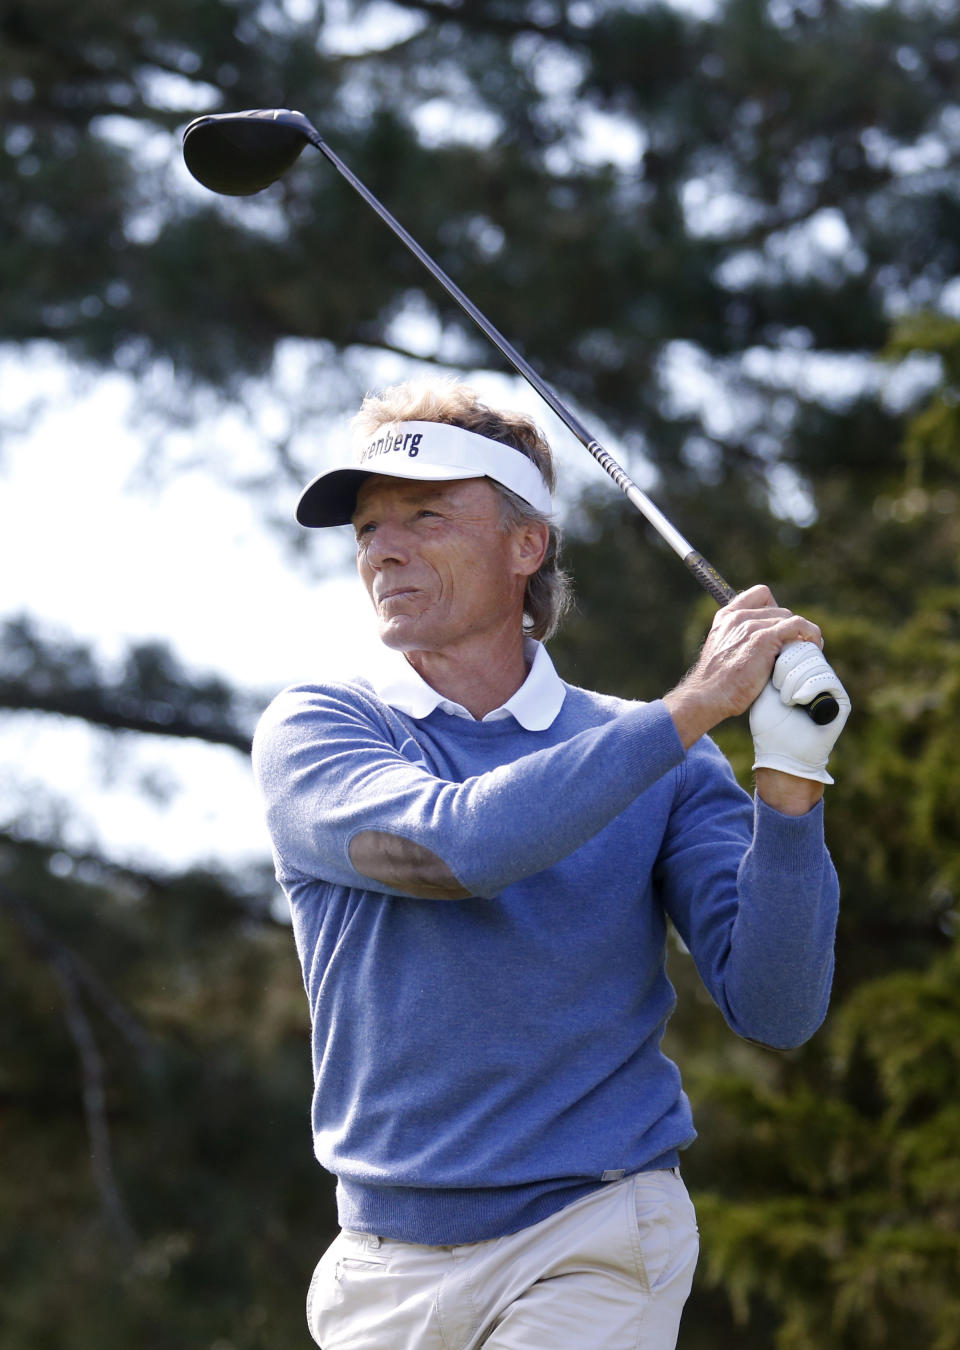 Bernhard Langer watches his tee shot on the third hole during the final day of the Dominion Energy Charity Classic golf tournament at The Country Club of Virginia in Richmond, Va., Sunday, Oct. 21, 2018. (Daniel Sangjib/Richmond Times-Dispatch via AP)